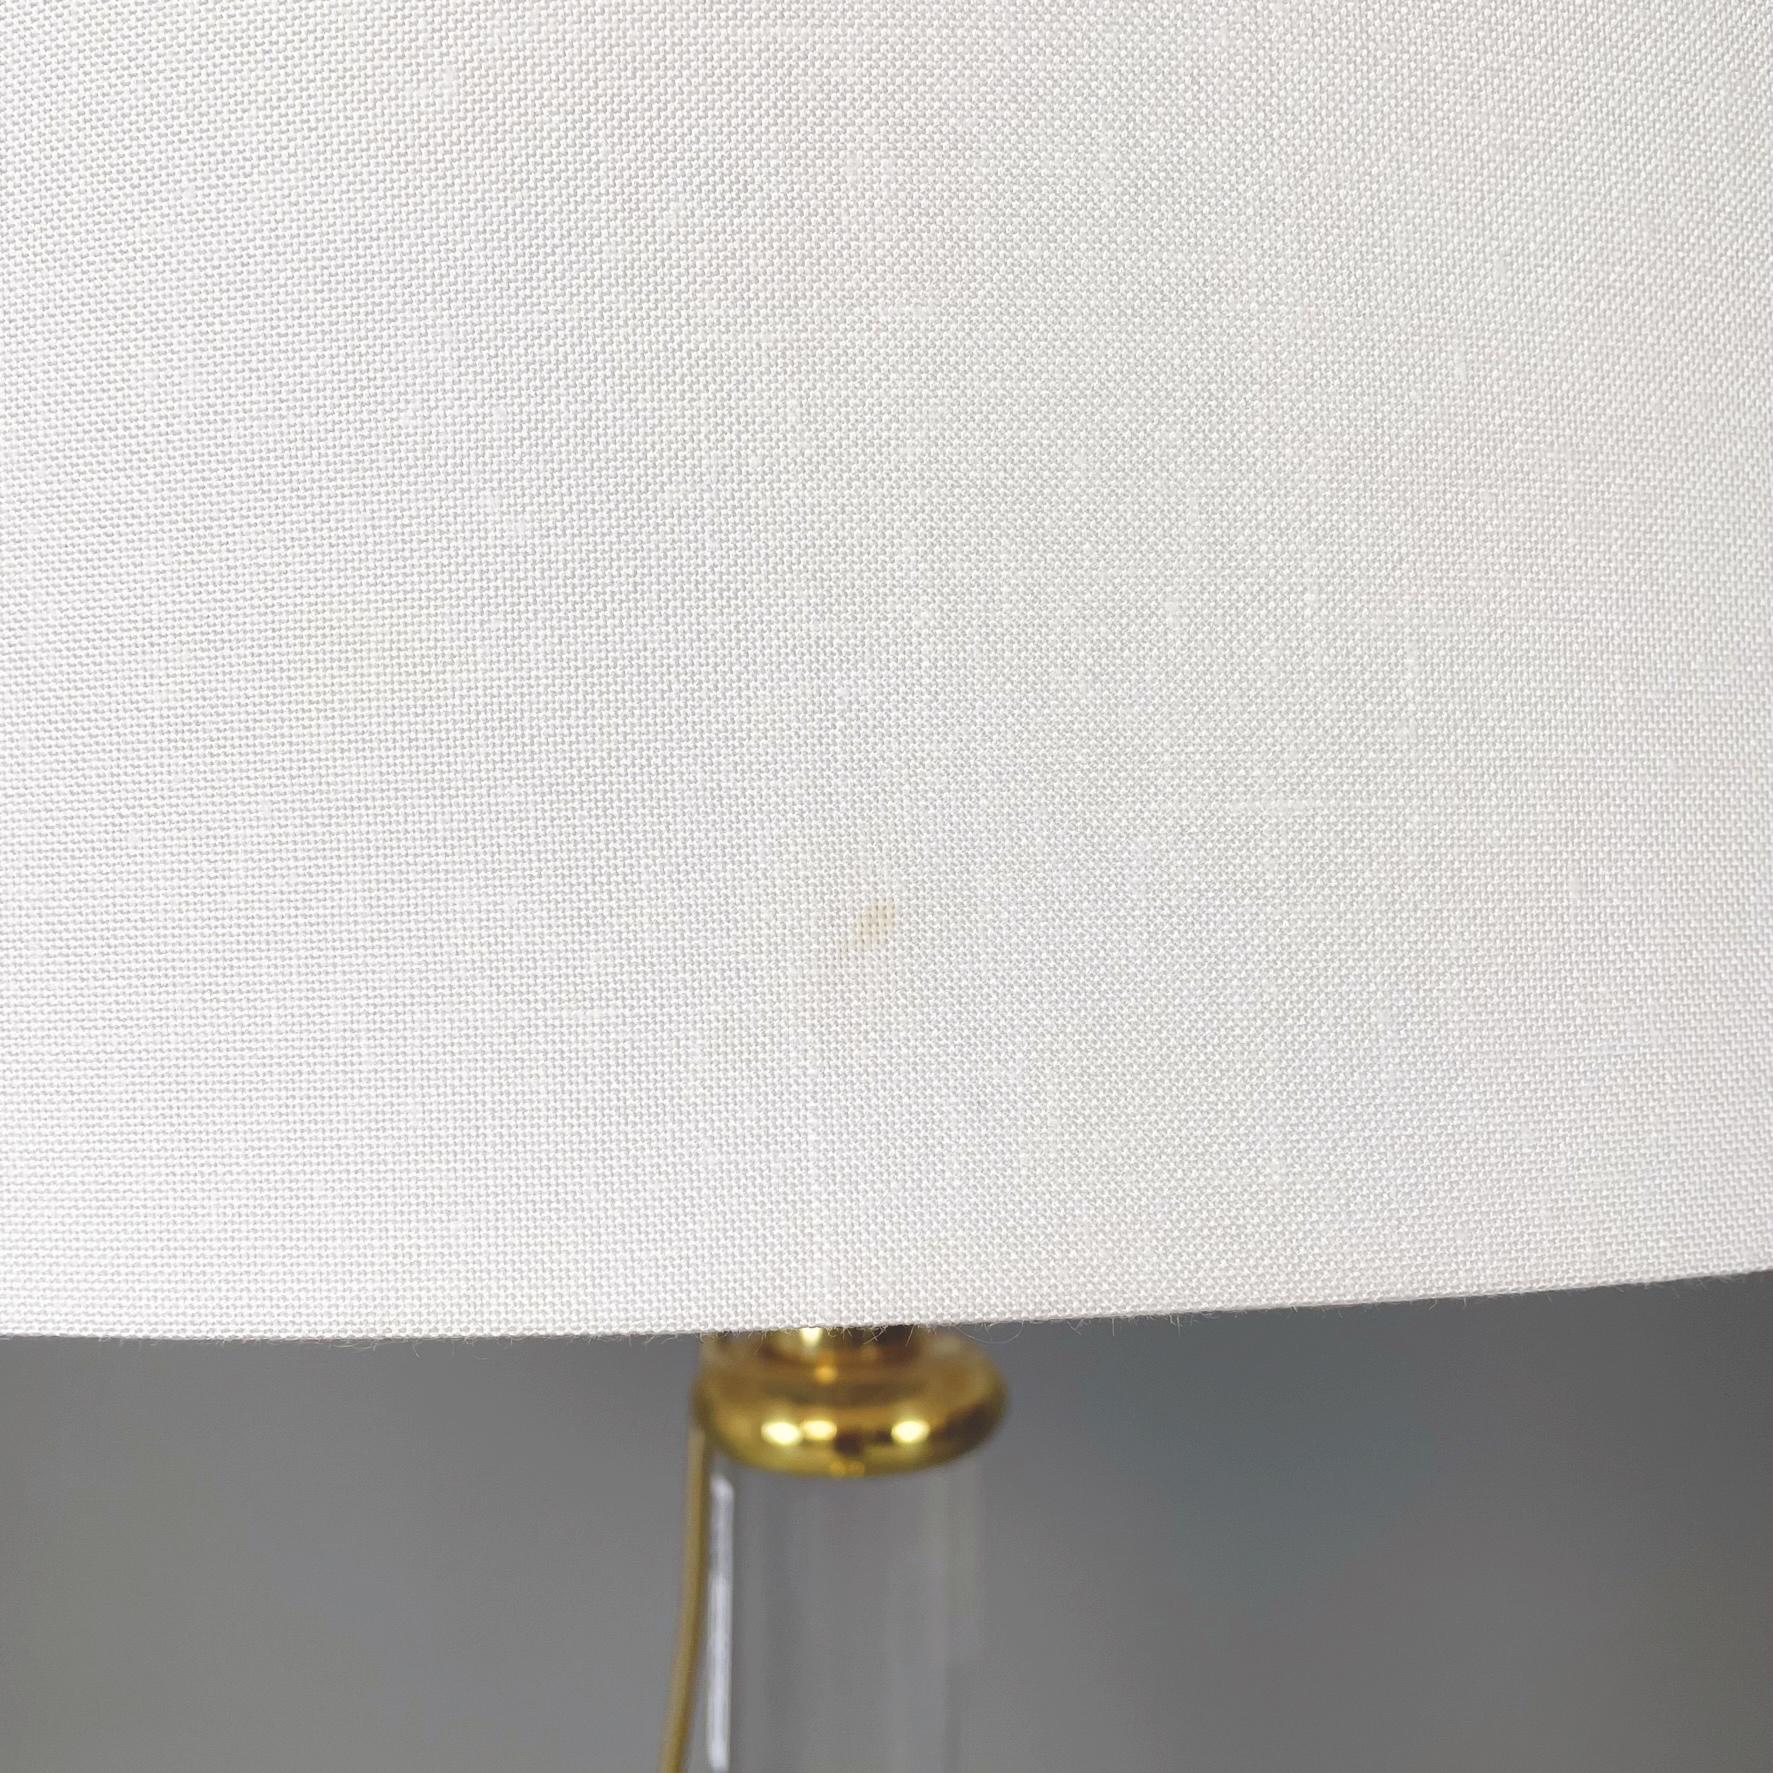 Italian Modern Floor Lamp in White Fabric Lampshade, Plexiglass and Brass, 1980s For Sale 2